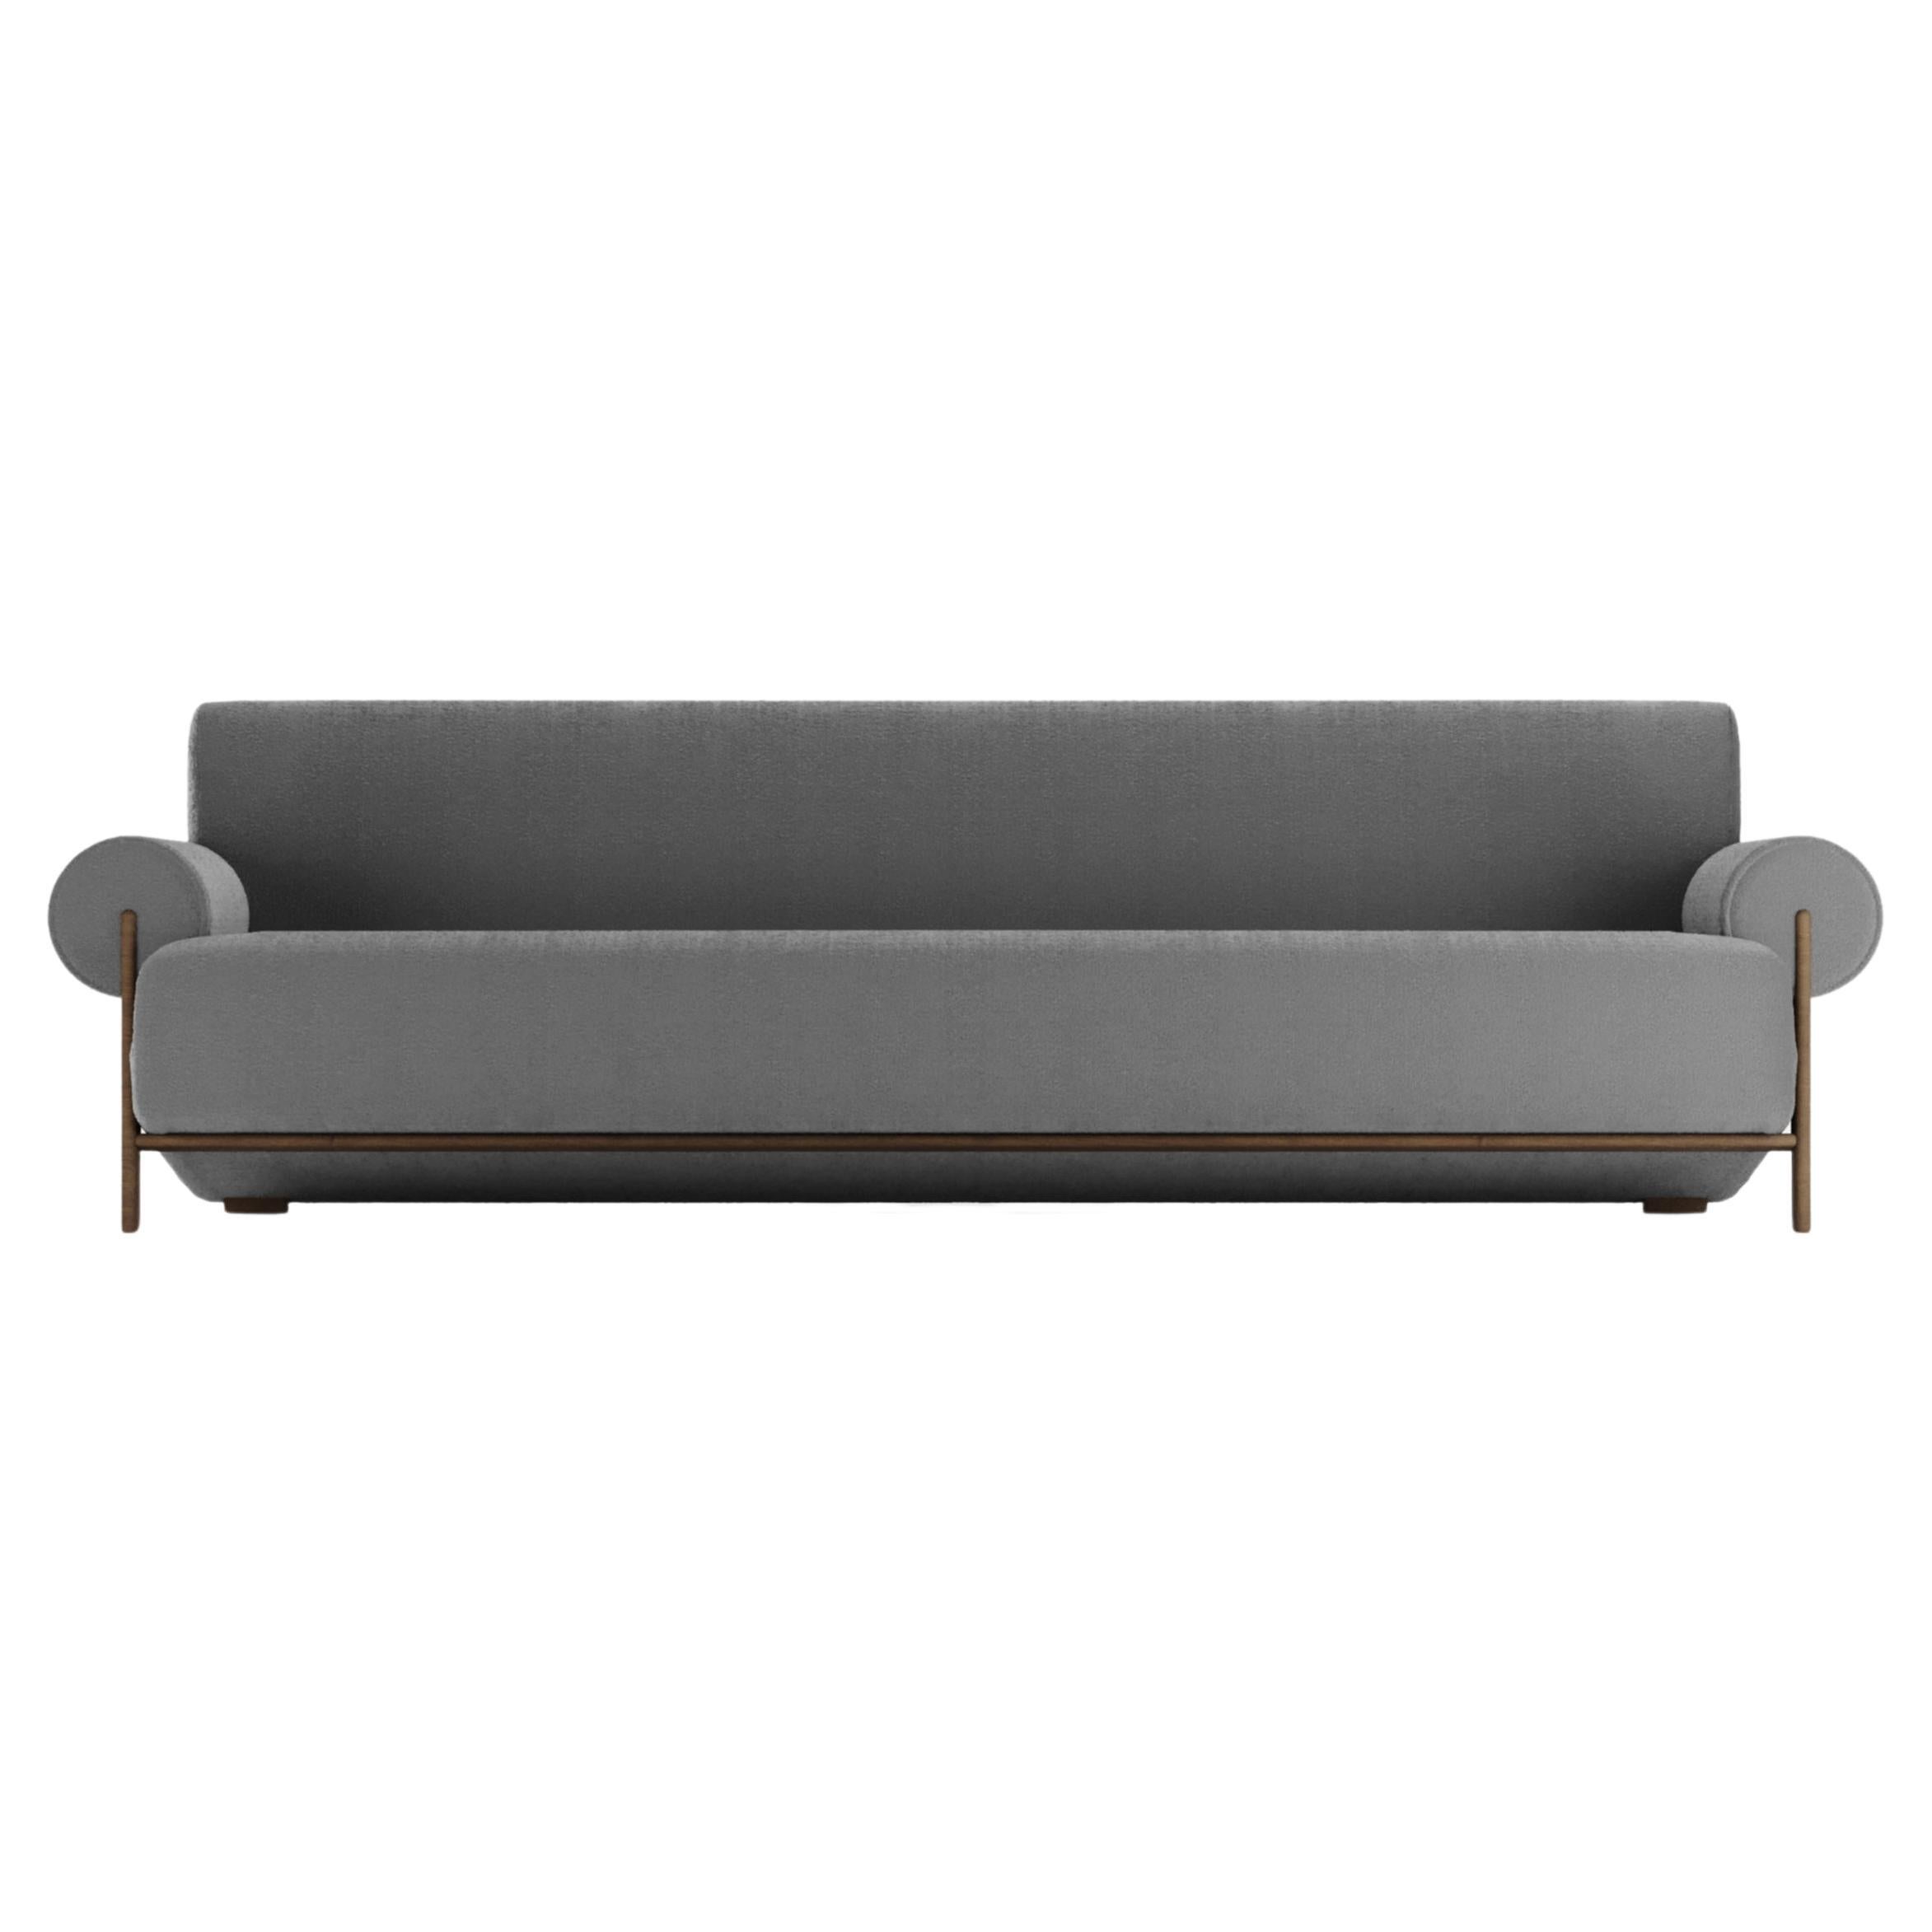 Contemporary Modern Paloma Sofa in Bouclé Charcoal Grey von Collector im Angebot